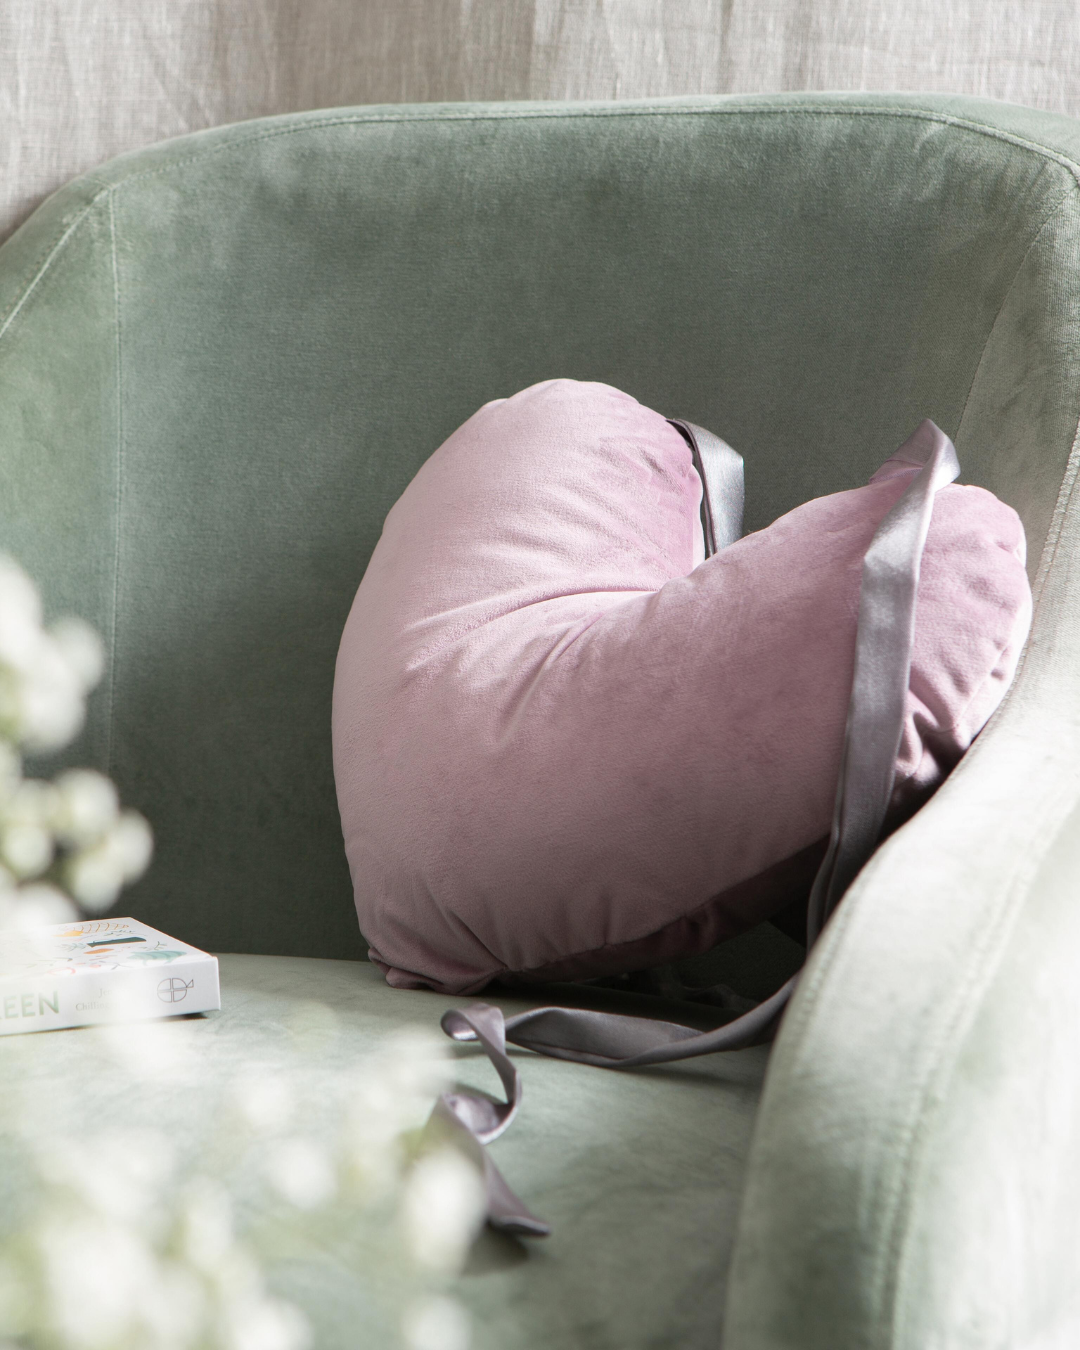 Cancer Research UK post surgery pillow to make recovery more comfortable